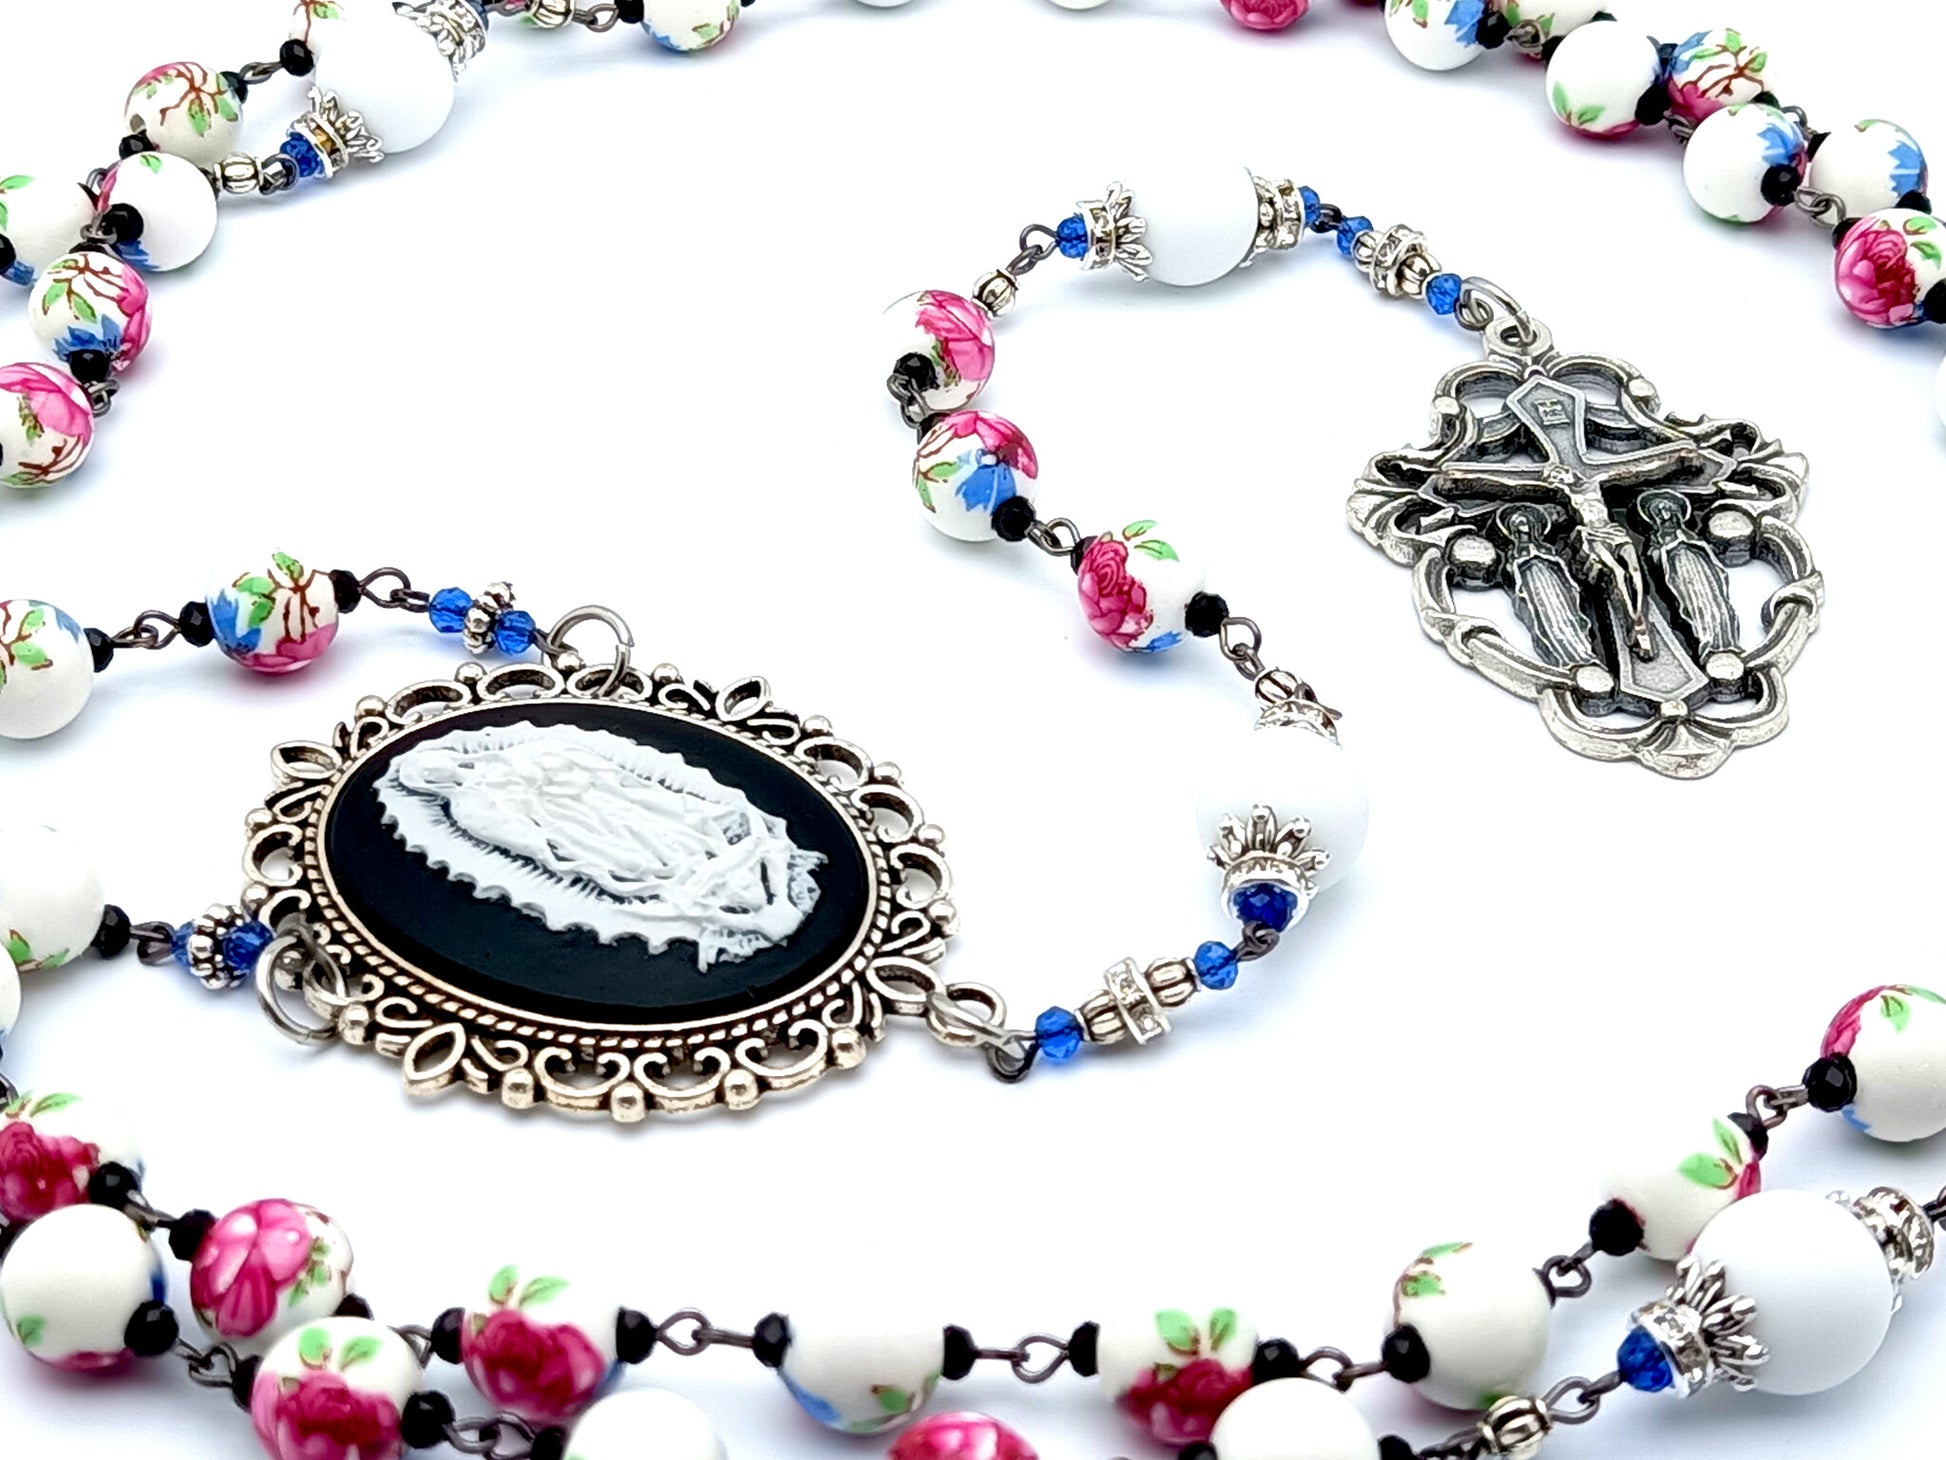 Our Lady of Guadalupe cameo unique rosary beads with porcelain and alabaster gemstone beads and two Angel crucifix.